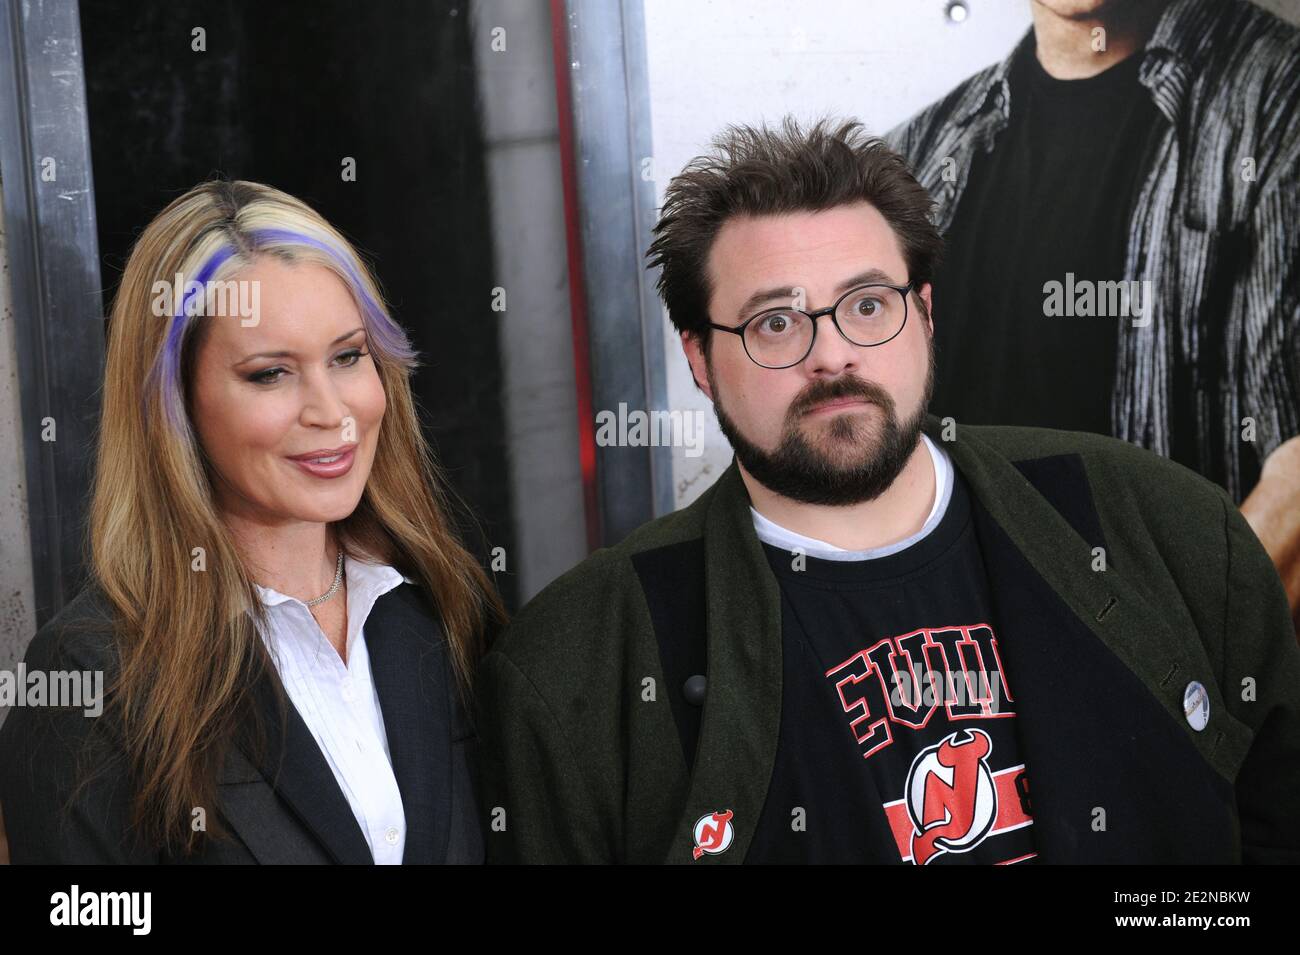 Director Kevin Smith and Jennifer Schwalbach arriving for the premiere of 'Cop Out' at AMC Loews Lincoln Square 13 in New York City, NY, USA, on February 22, 2010. Photo by Mehdi Taamallah/ABACAPRESS.COM Stock Photo